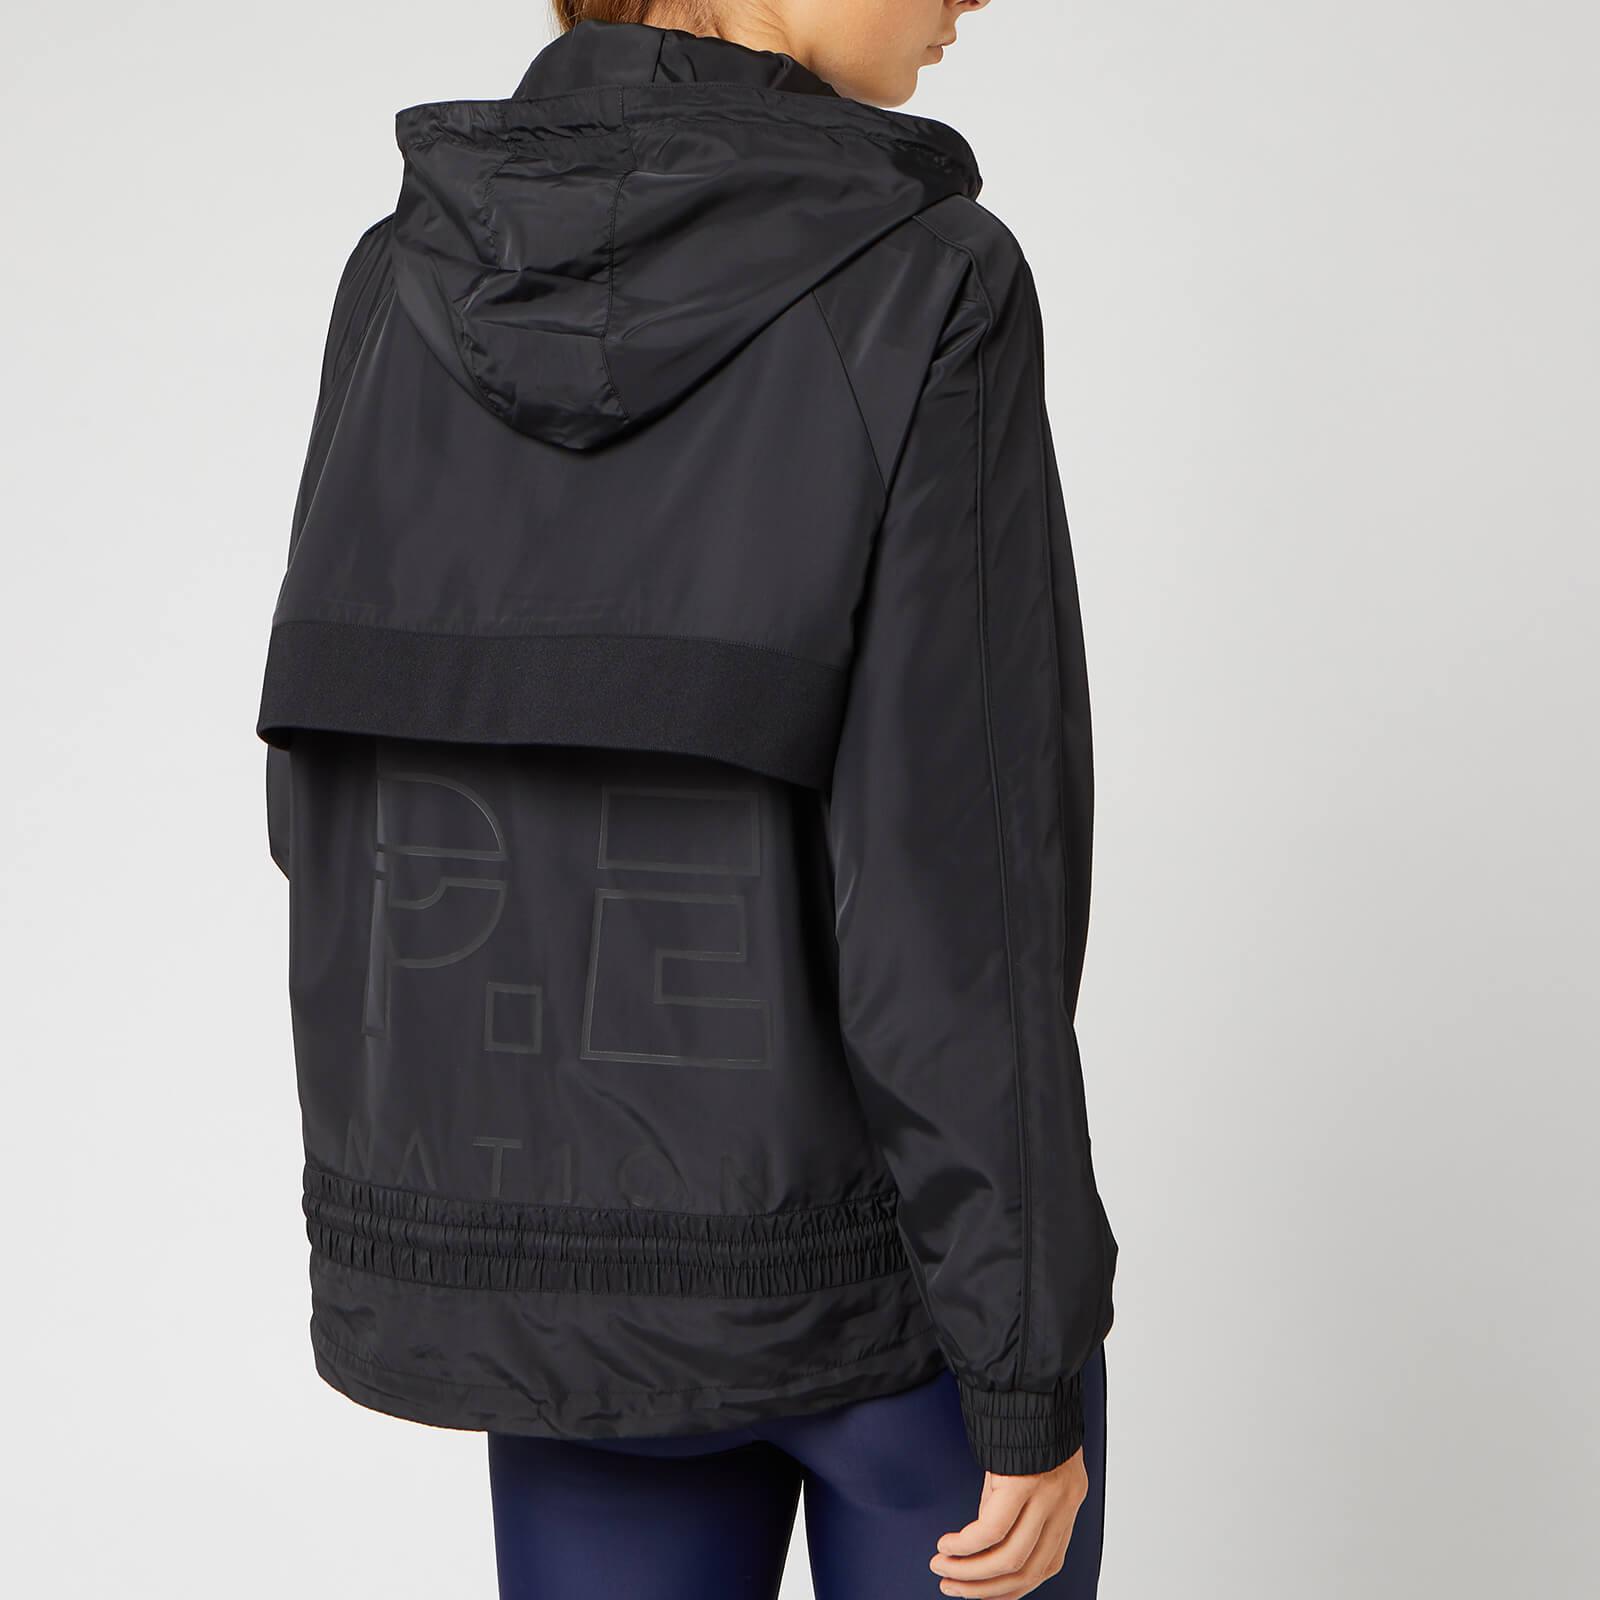 P.E Nation Training Day Man Down Jacket in Black - Lyst